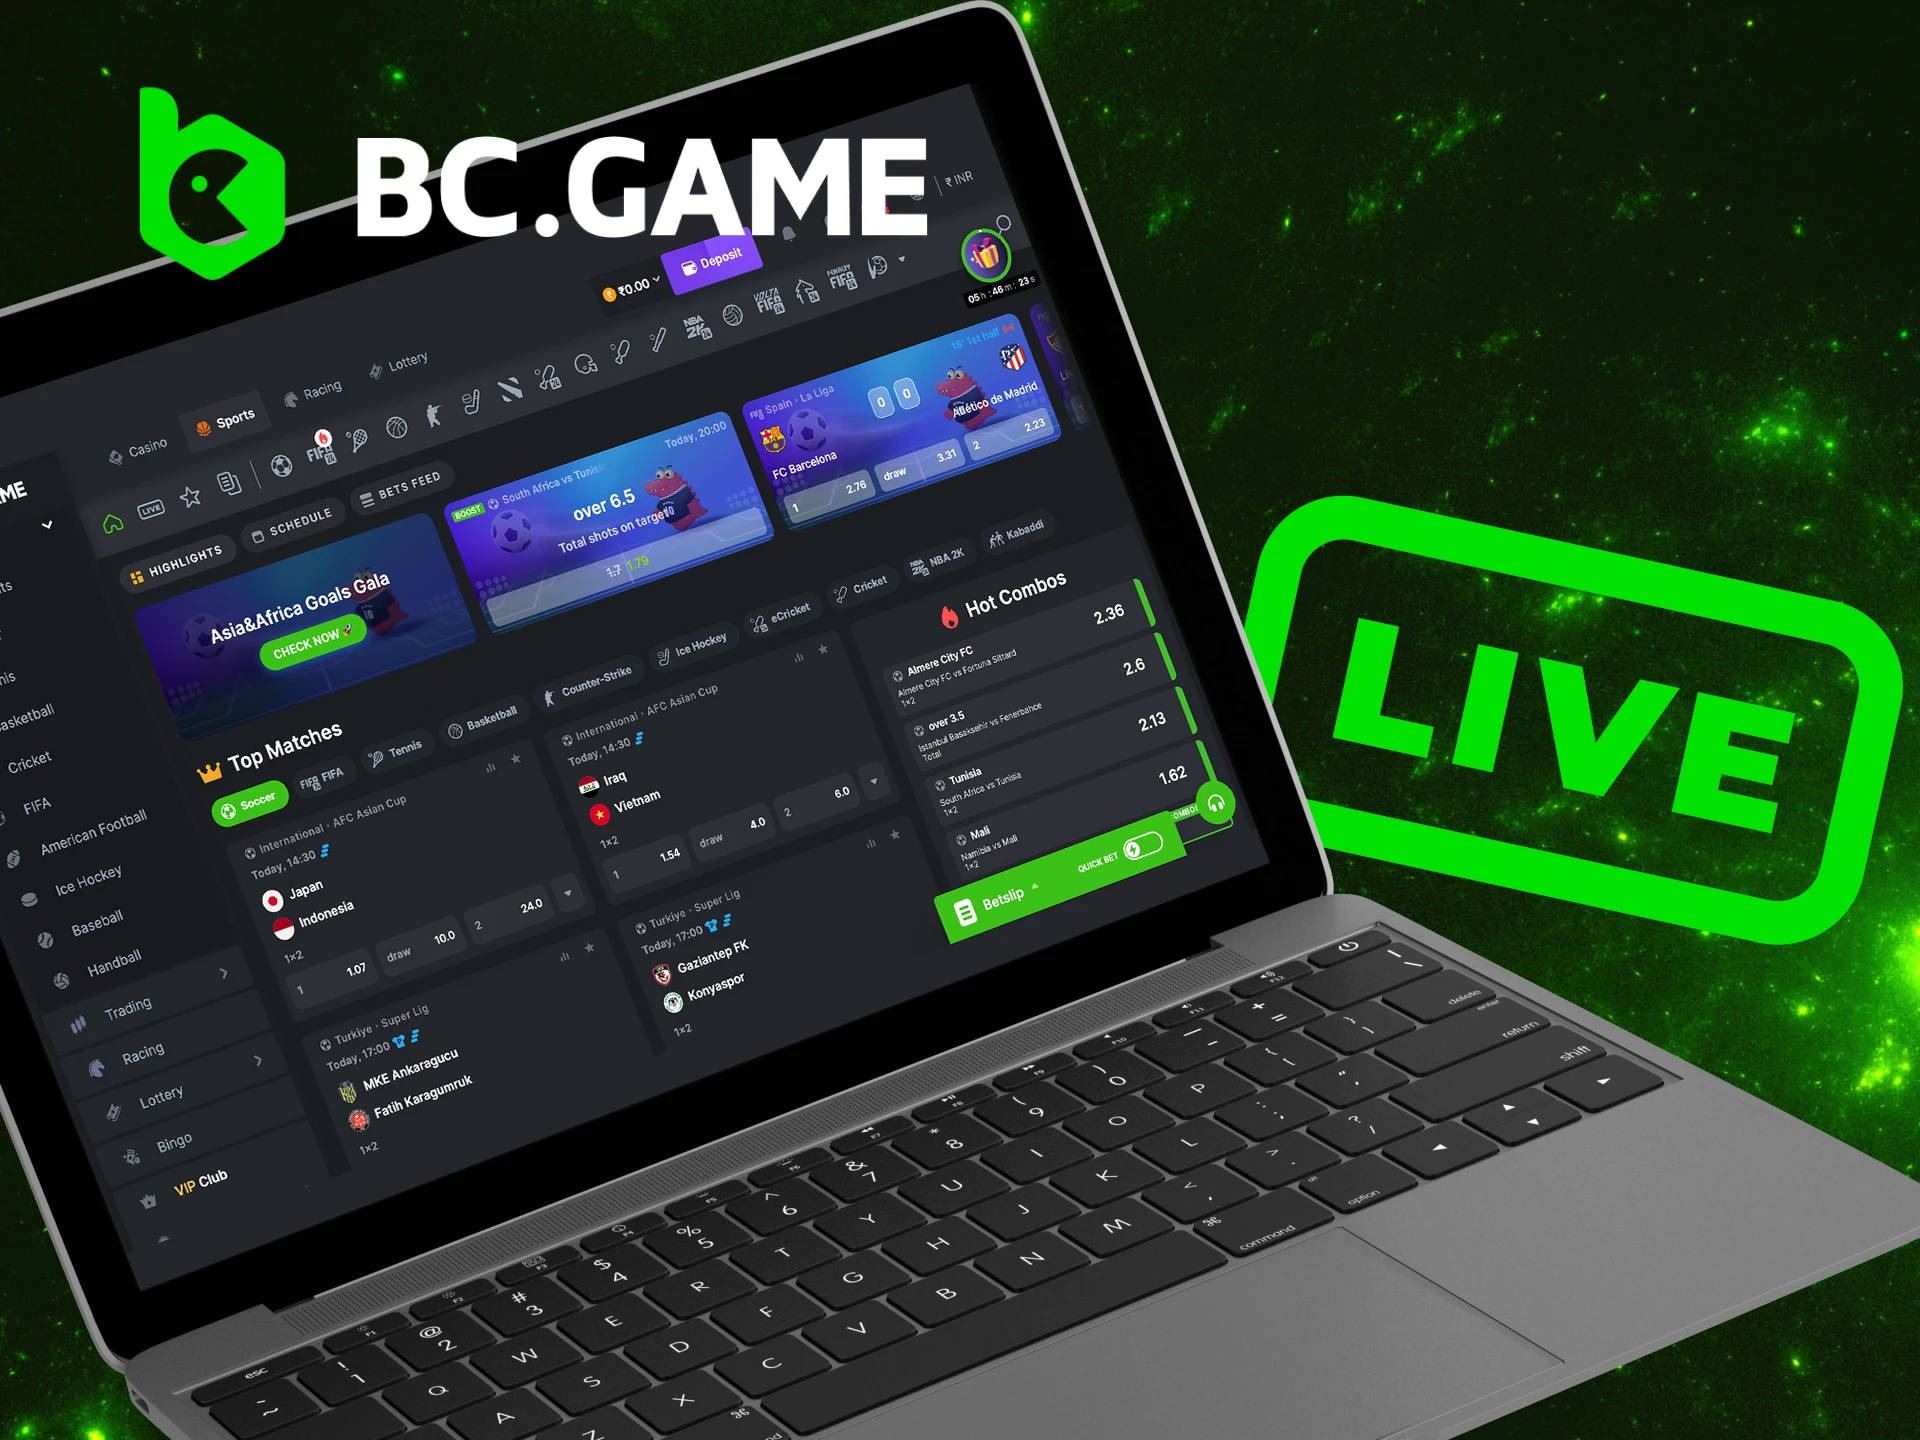 You can bet on sports in live mode.